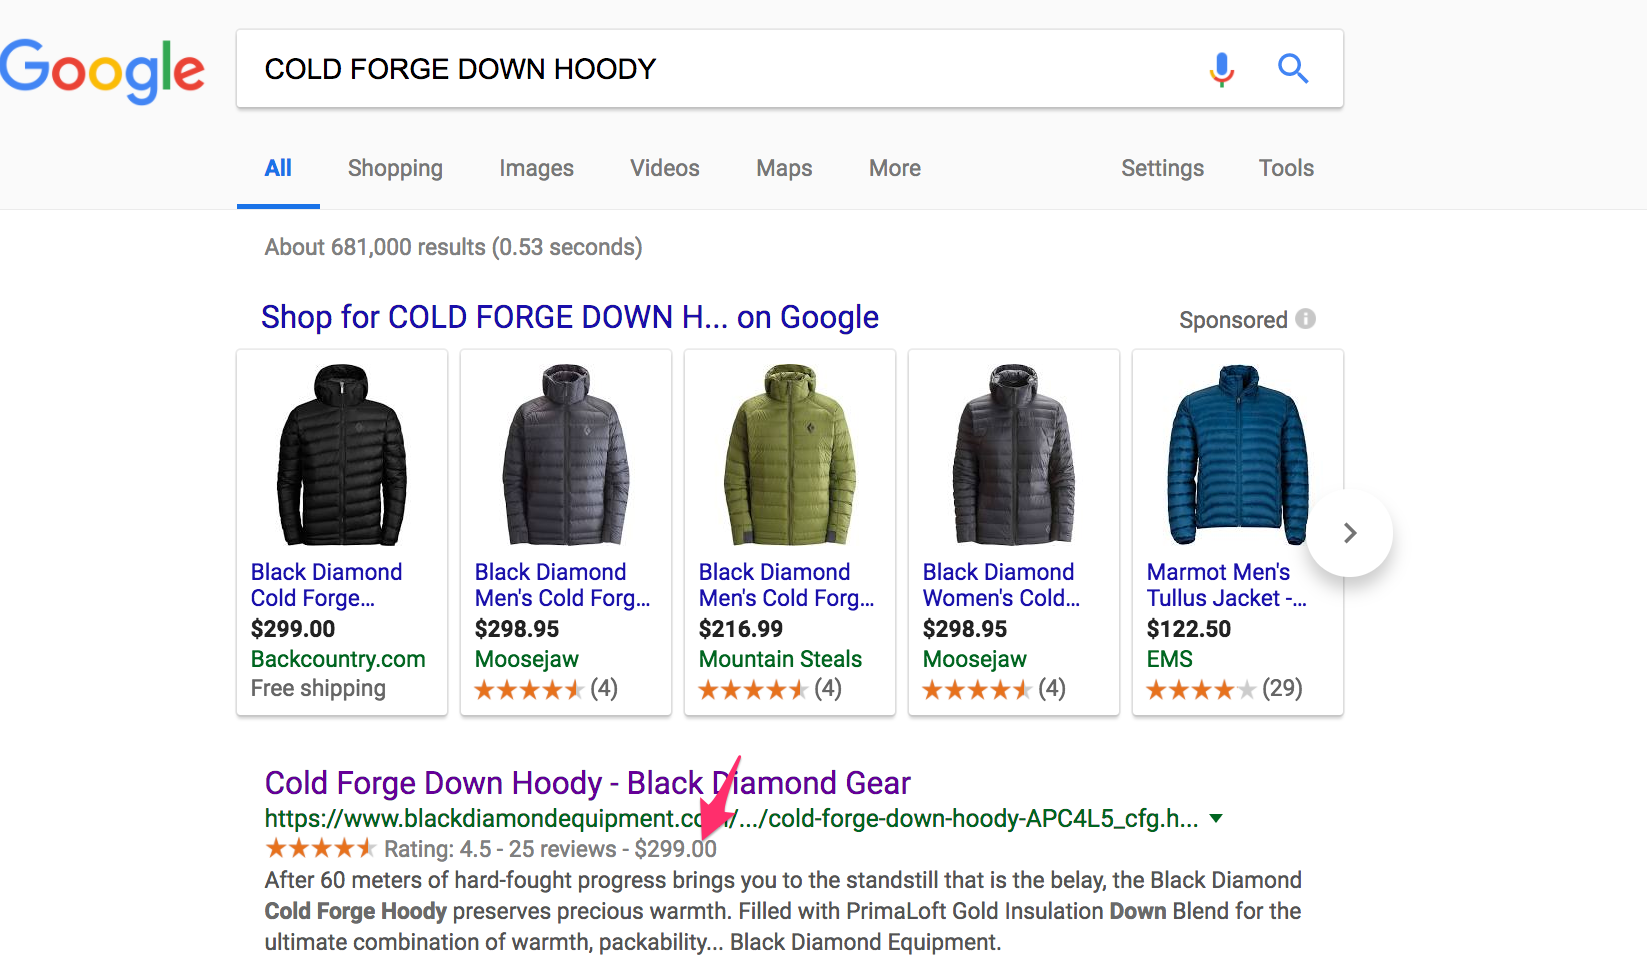 Black Diamond Equipment shows prices in search results — $299 in this case for a "Cold Forge Down Hoody."